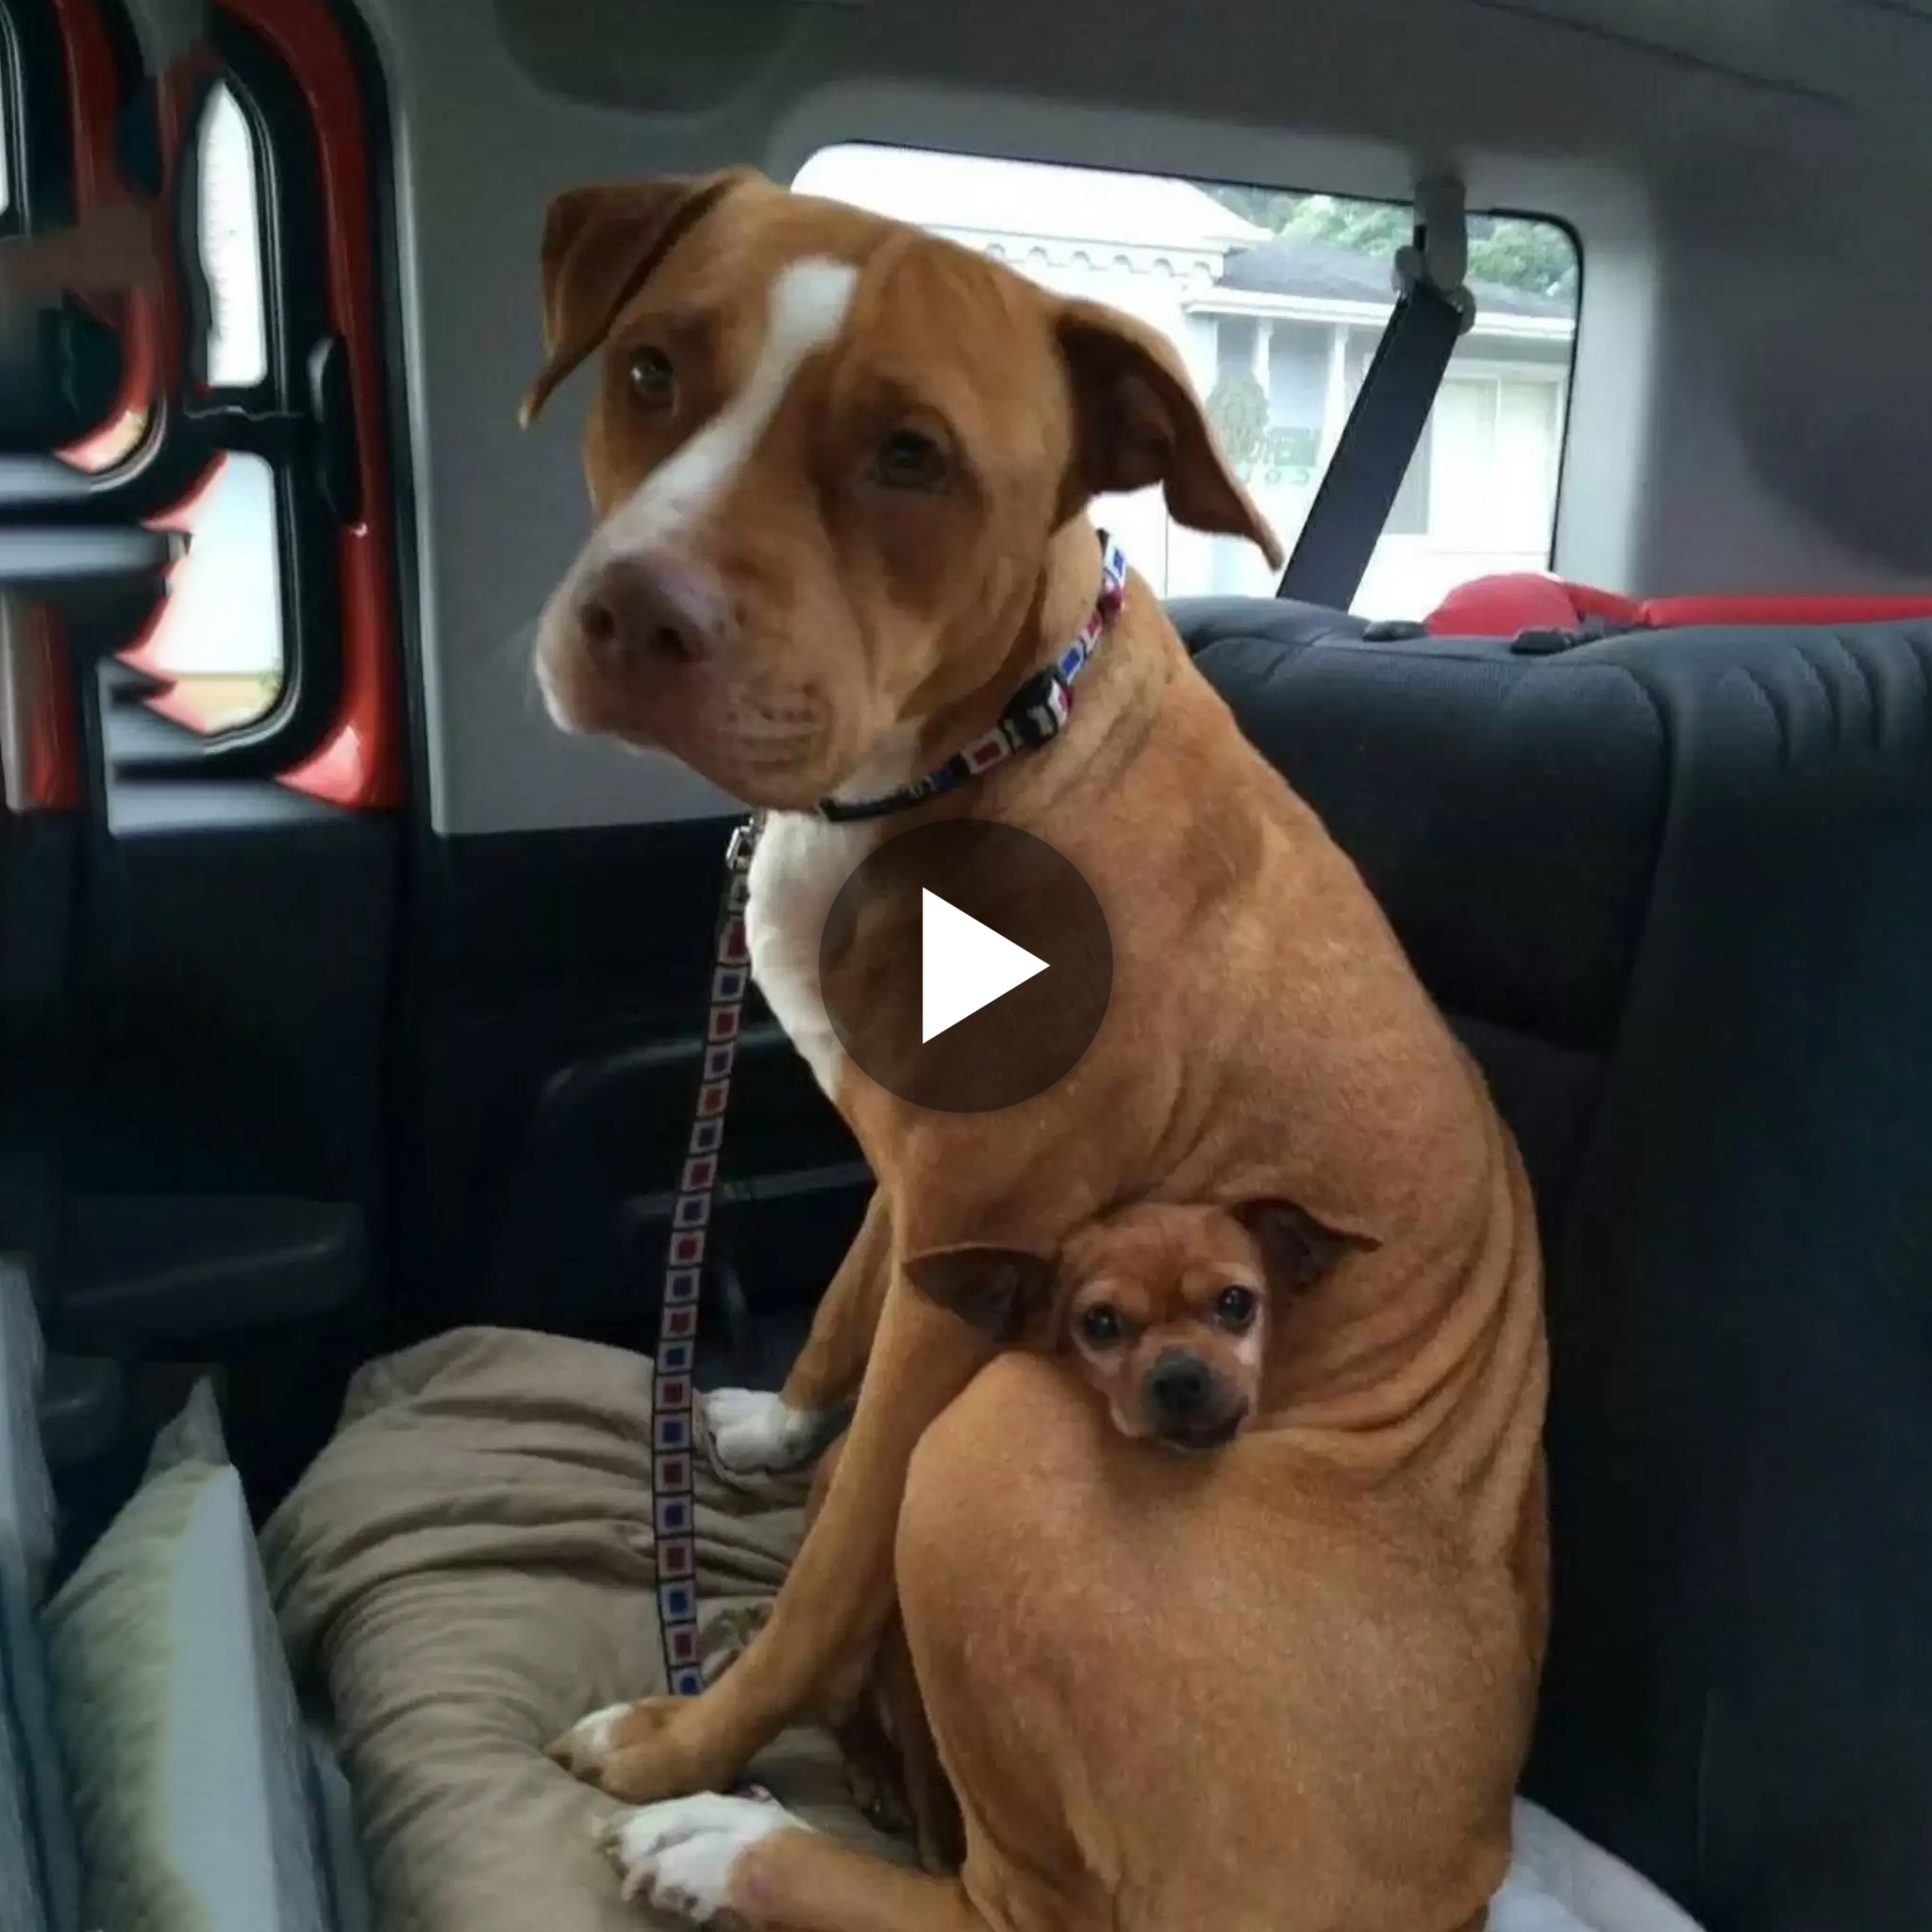 Heartwarming story: A 42-year-old man welcomed a 2-year-old pitbull into his home from a shelter, surprised to find the dog shielded himself so that he could not separate from his new companion acquaintance.